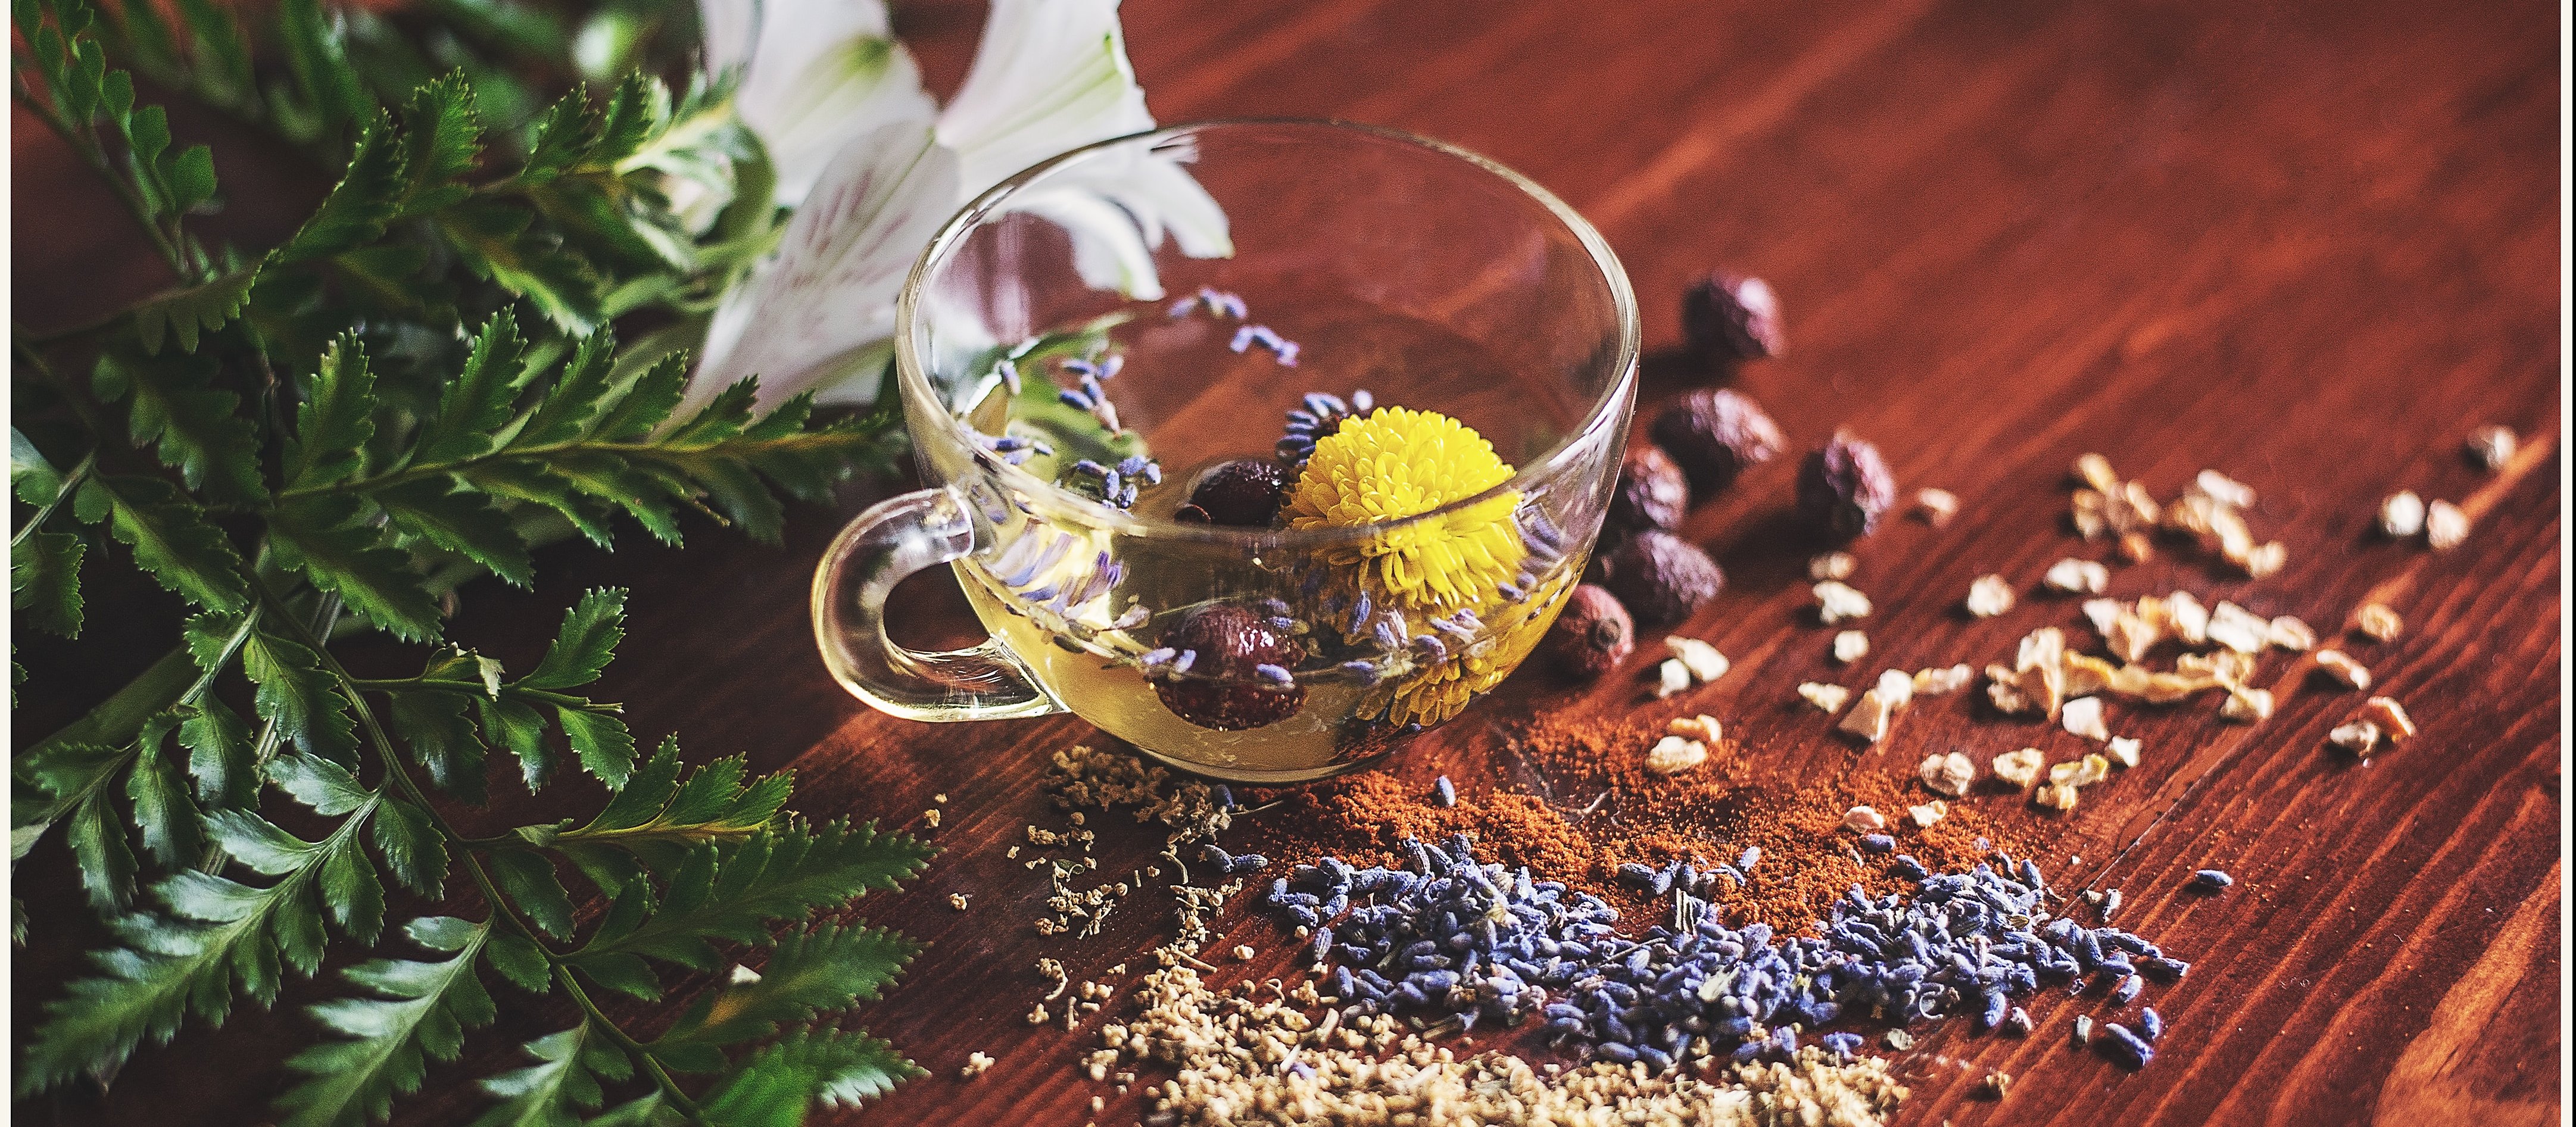 Image shows a clear glass cup of herbal tea, with flowers inside, on a wooden table strewn with herbs, leaves, and seeds